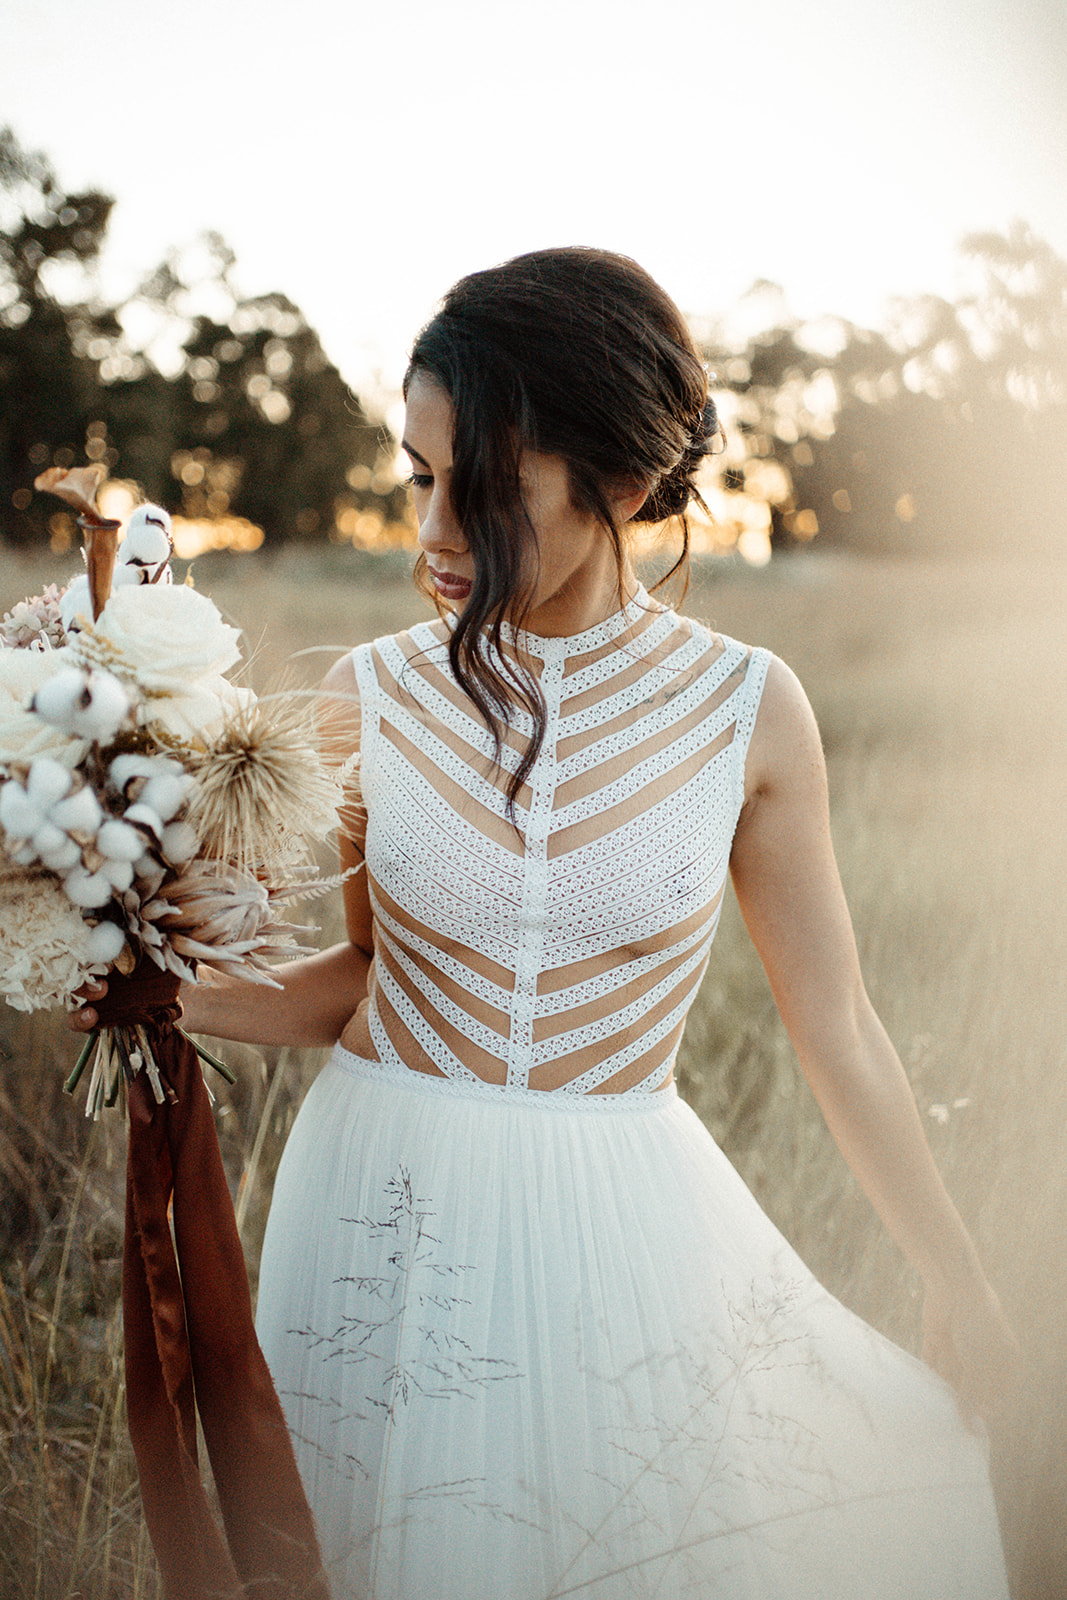 alannah liddell photography weddings perth bridal gown floral design venue styling